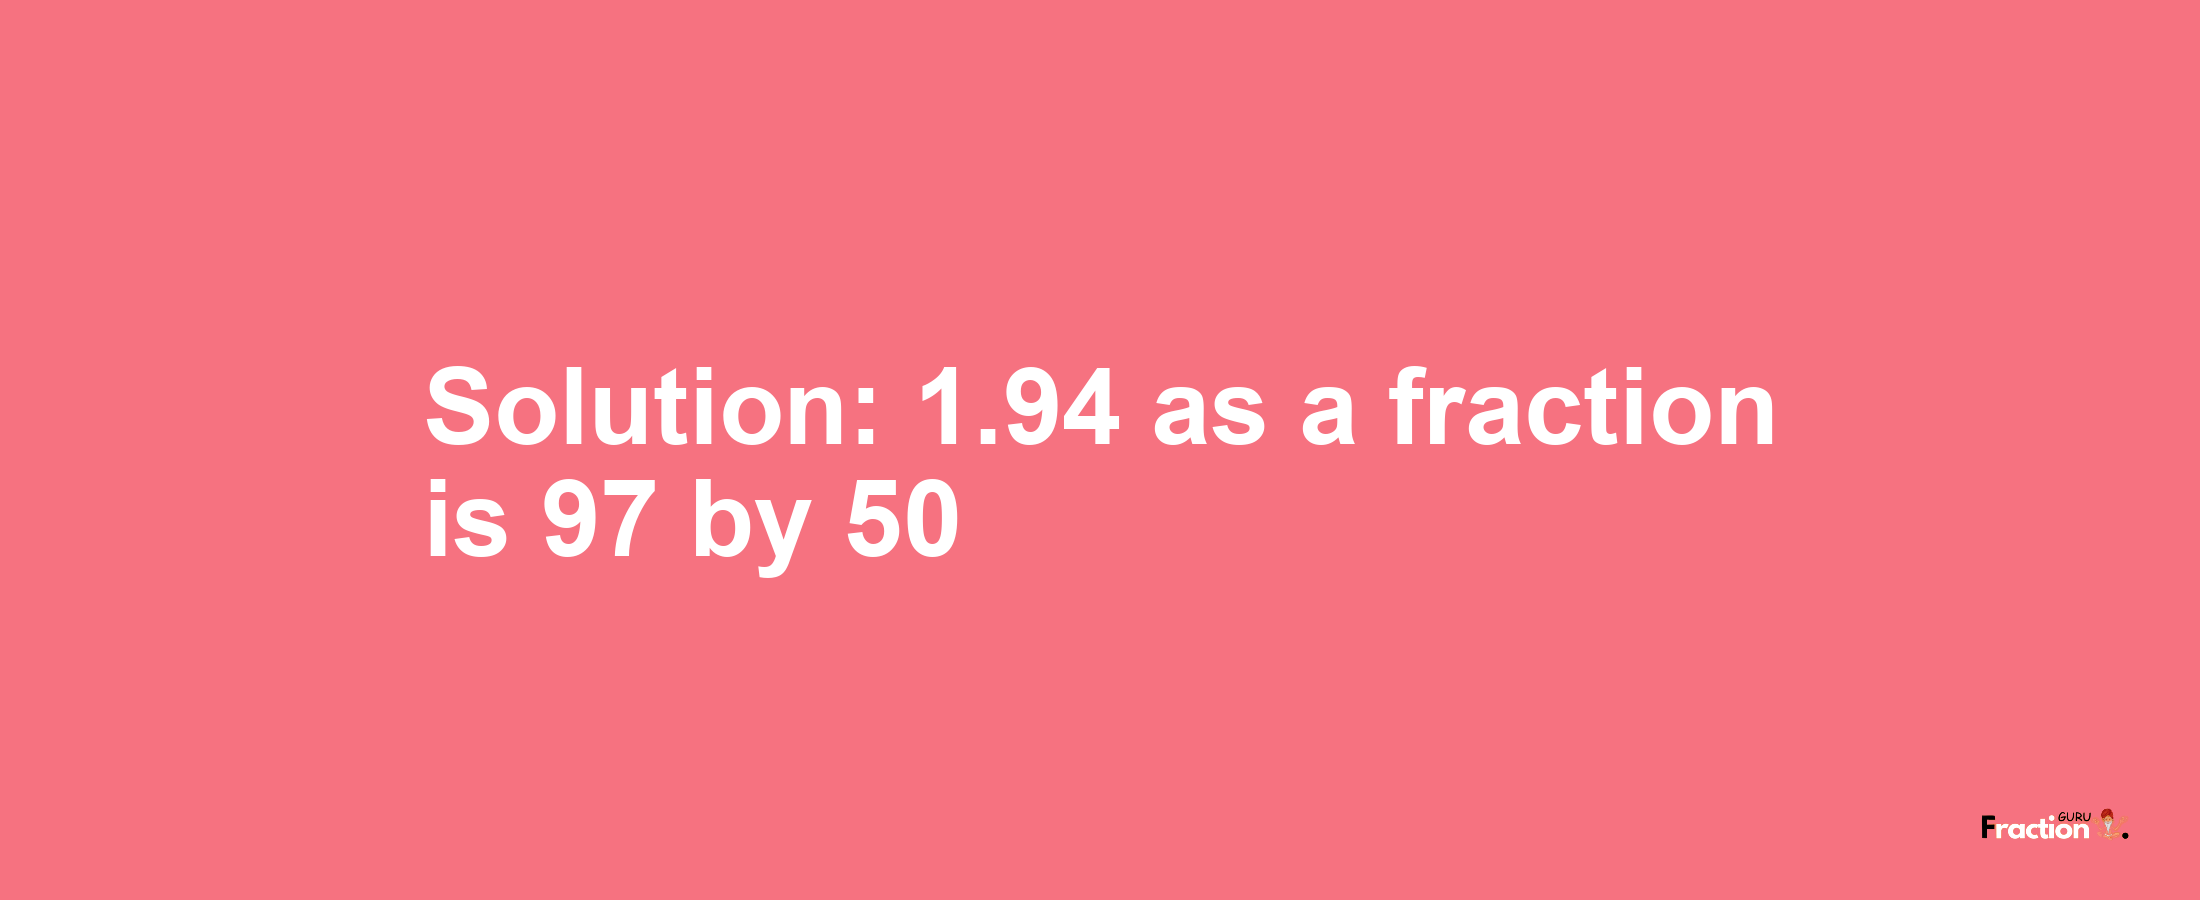 Solution:1.94 as a fraction is 97/50